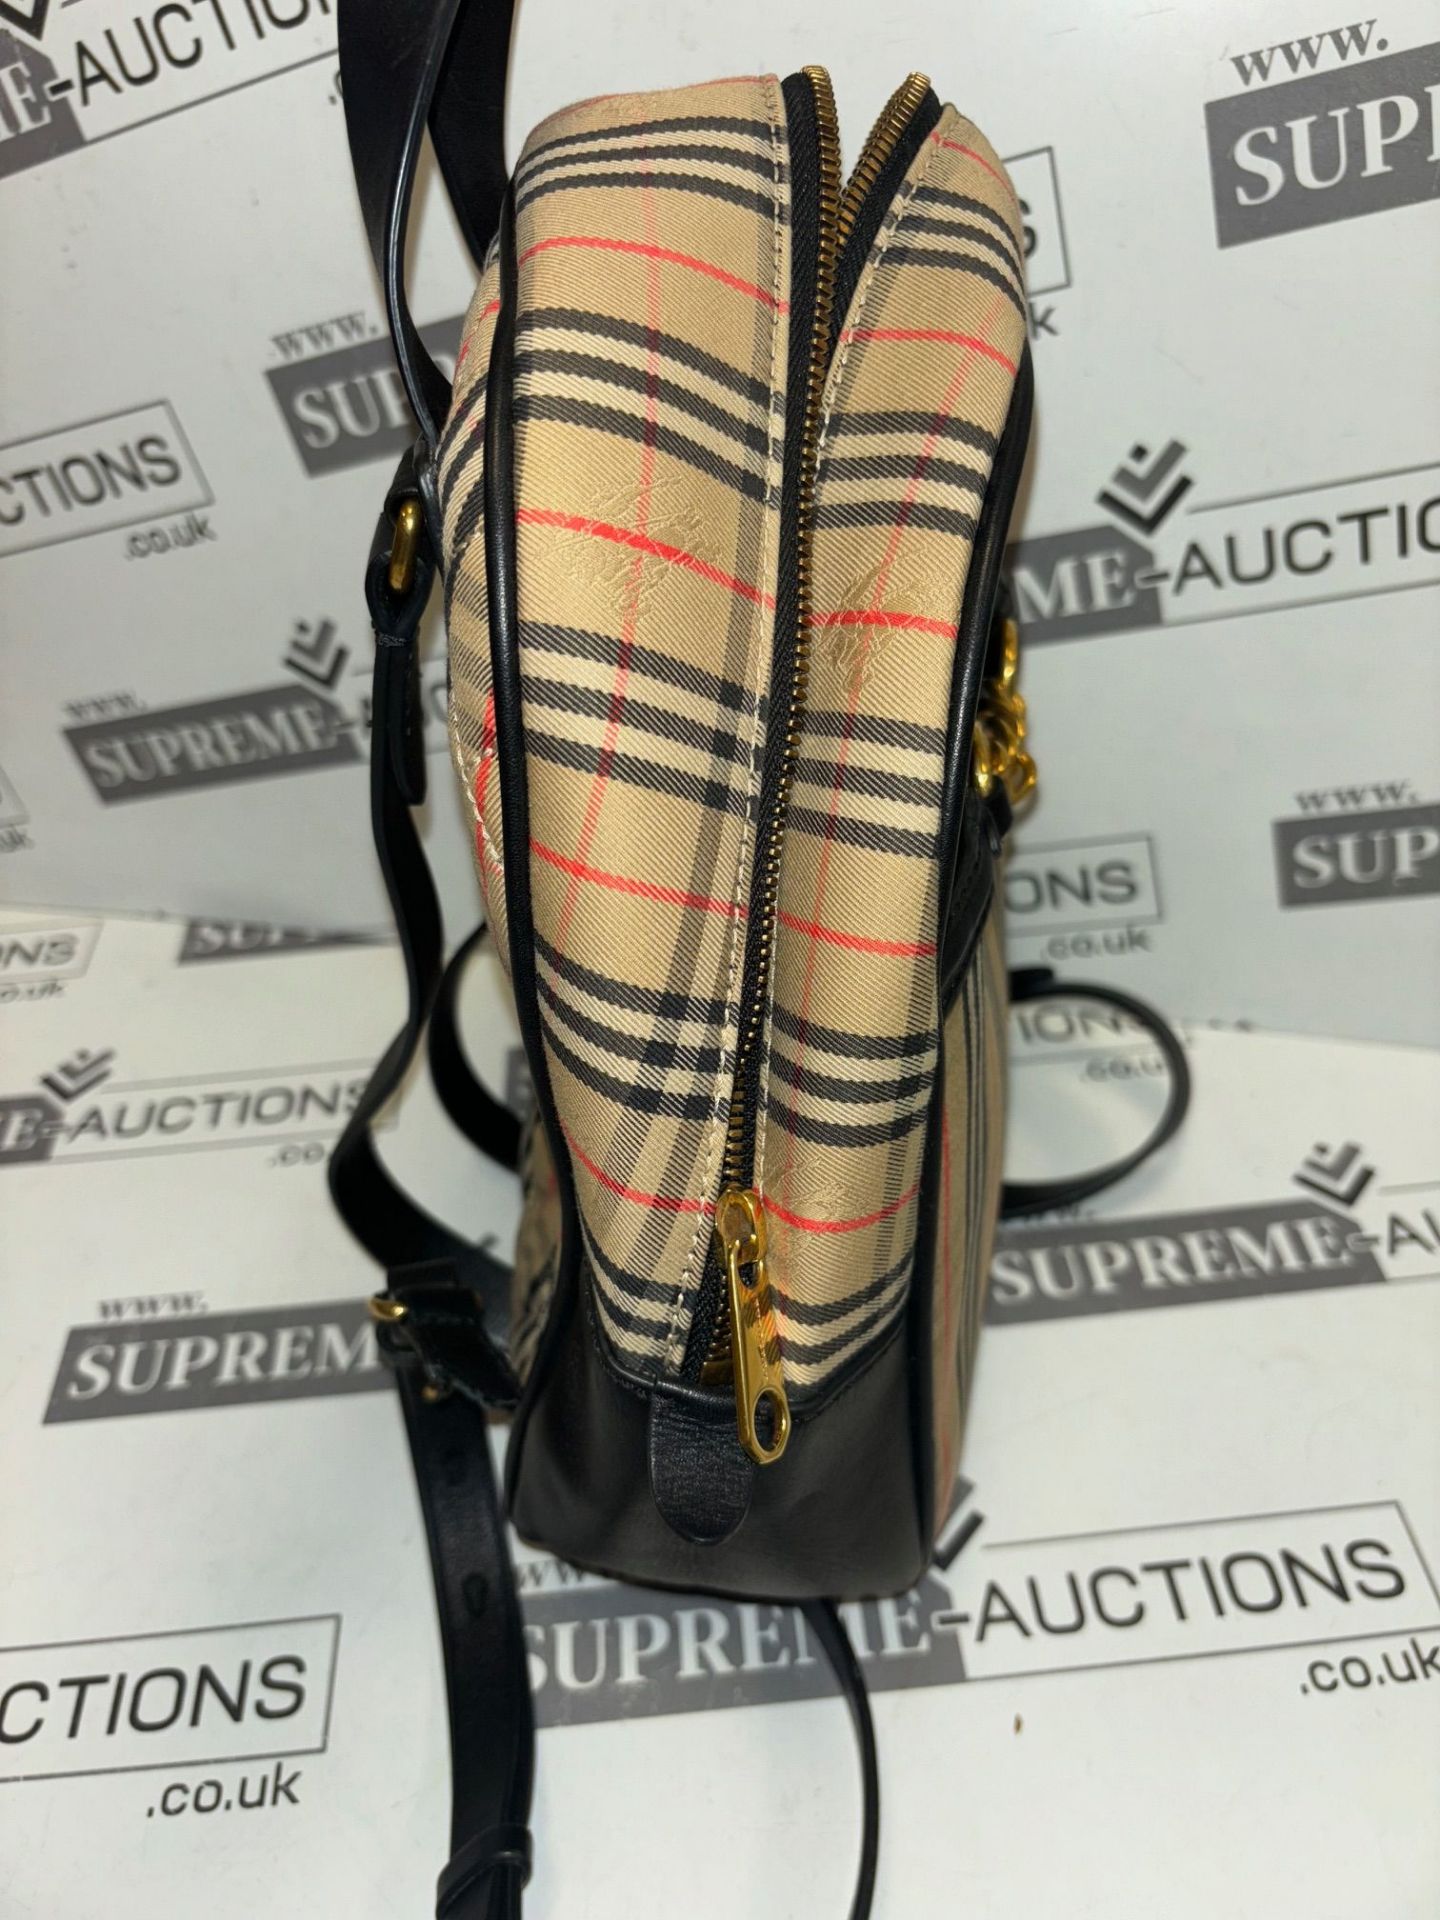 Burberry Link Backpack in Nova Check. 20x25cm. - Image 9 of 10